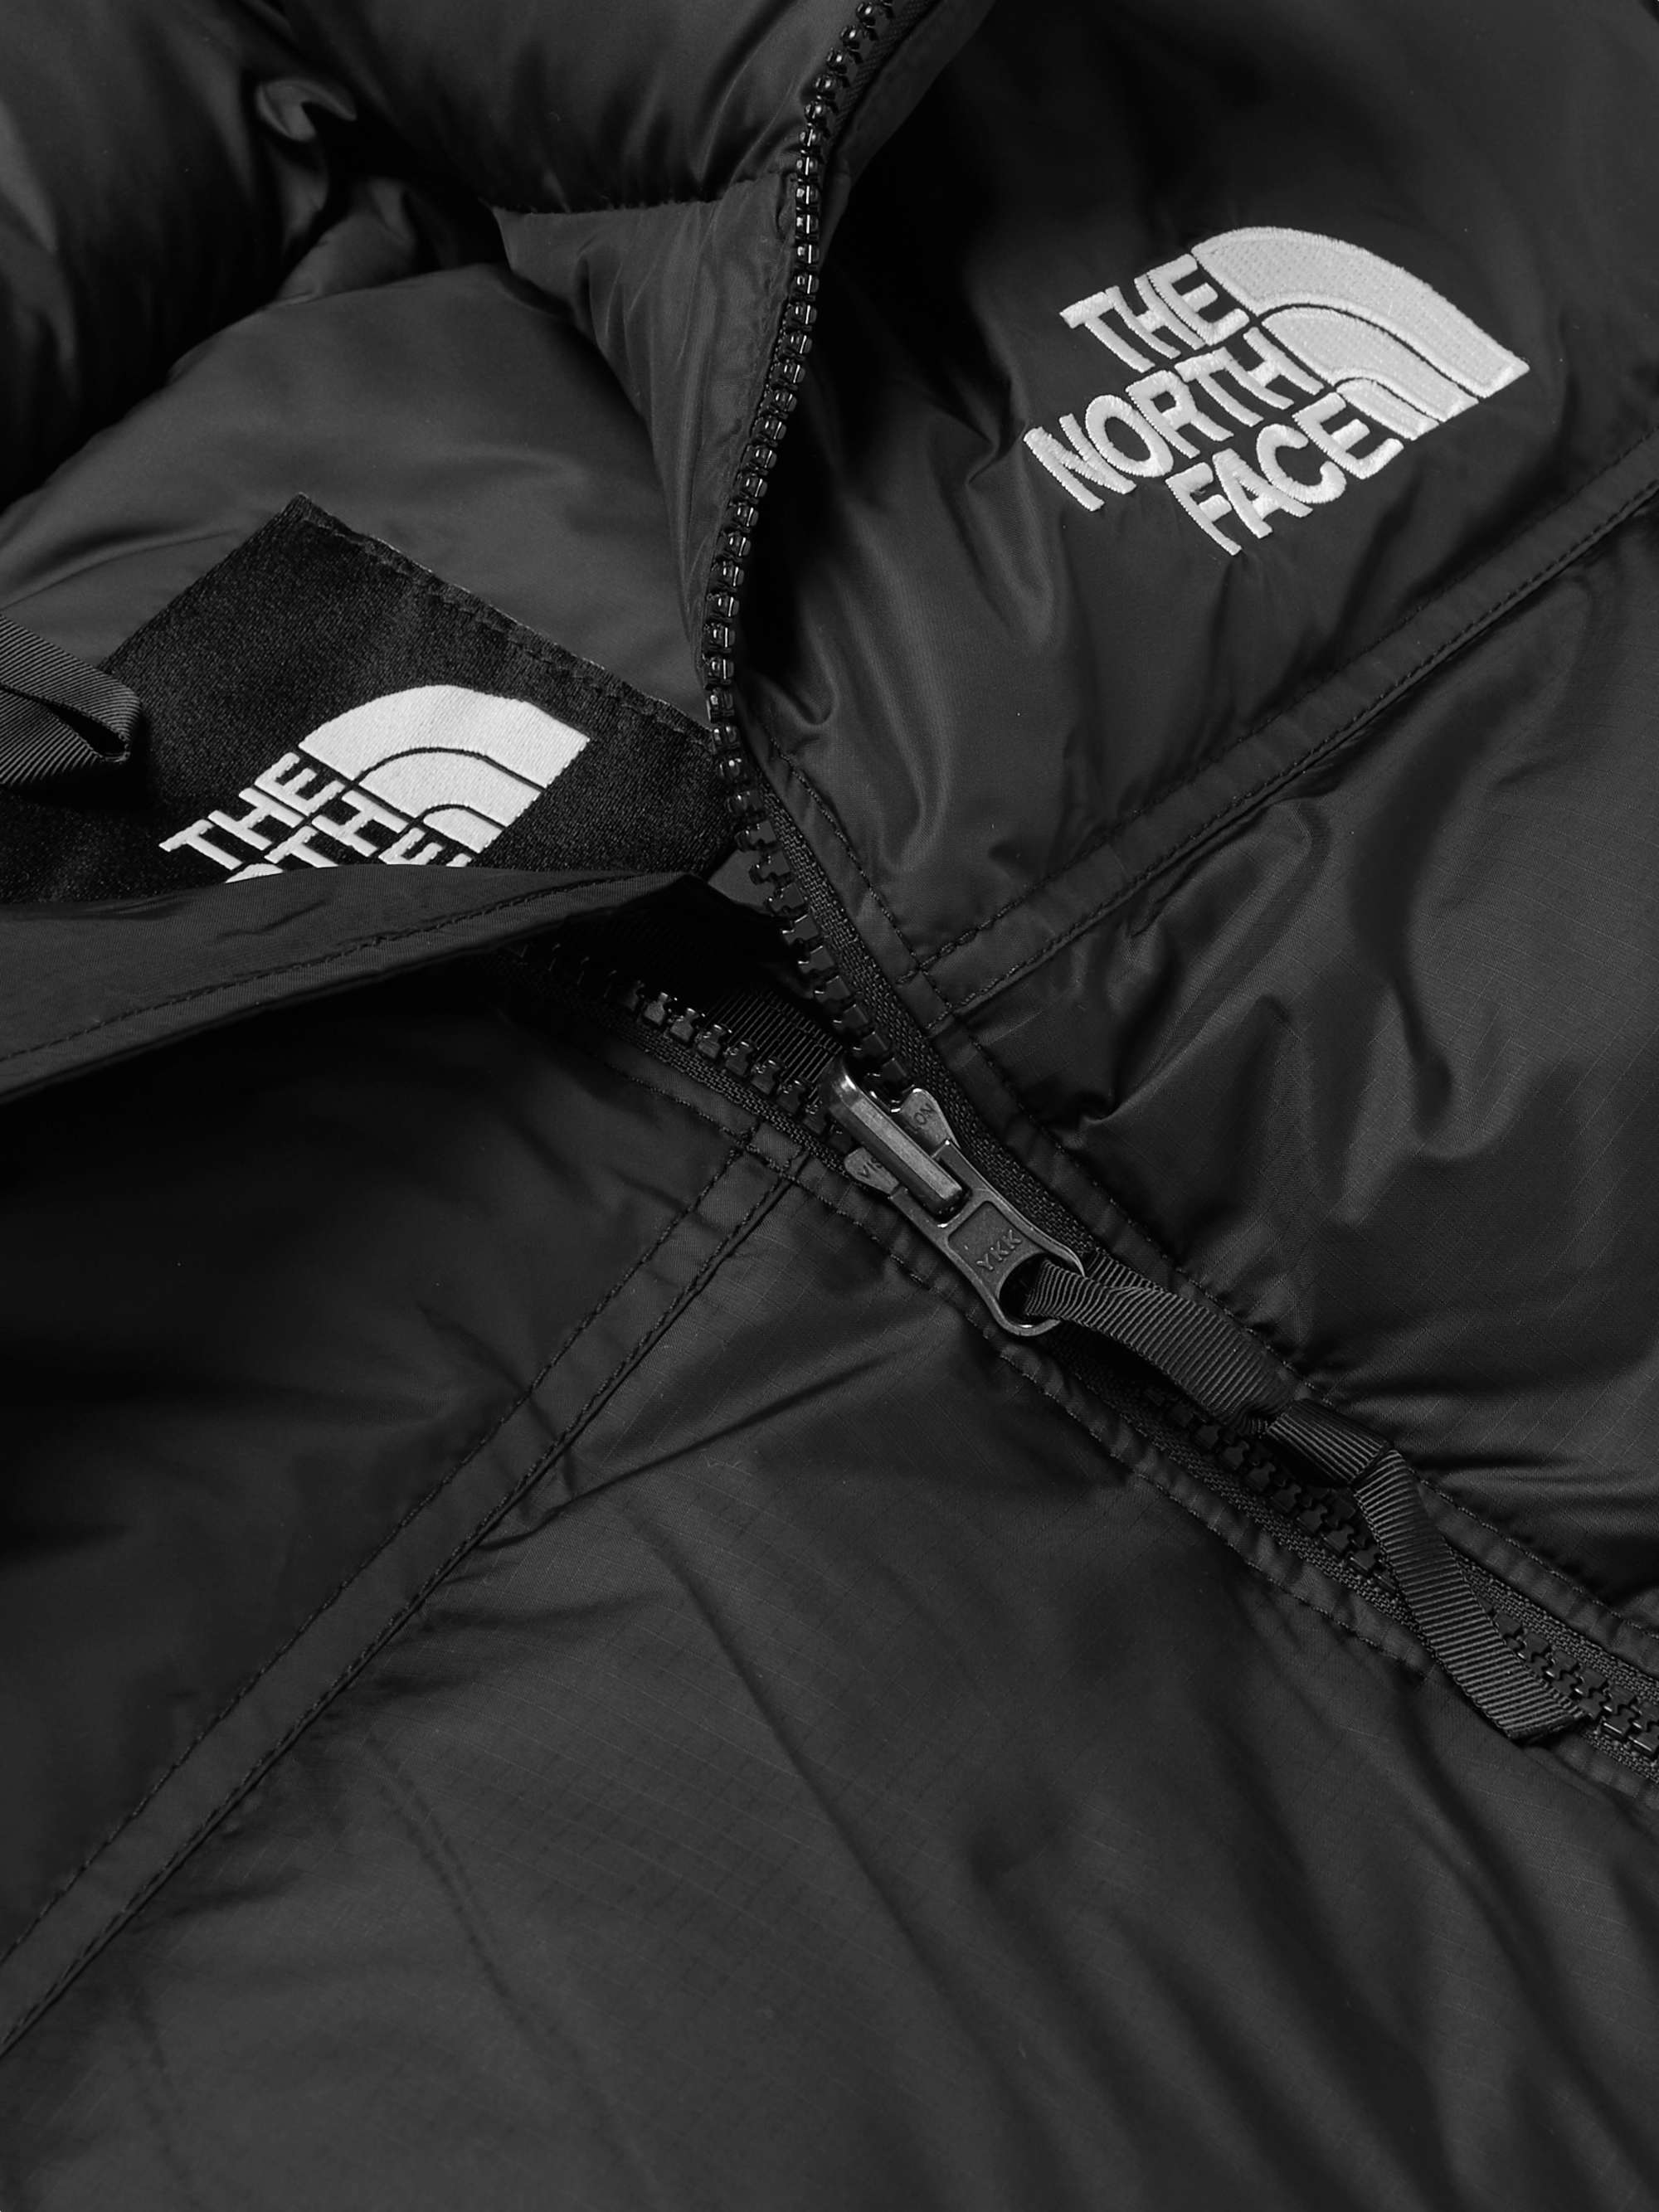 THE NORTH FACE 1996 Retro Nuptse Logo-Embroidered Quilted DWR-Coated Ripstop Down Jacket